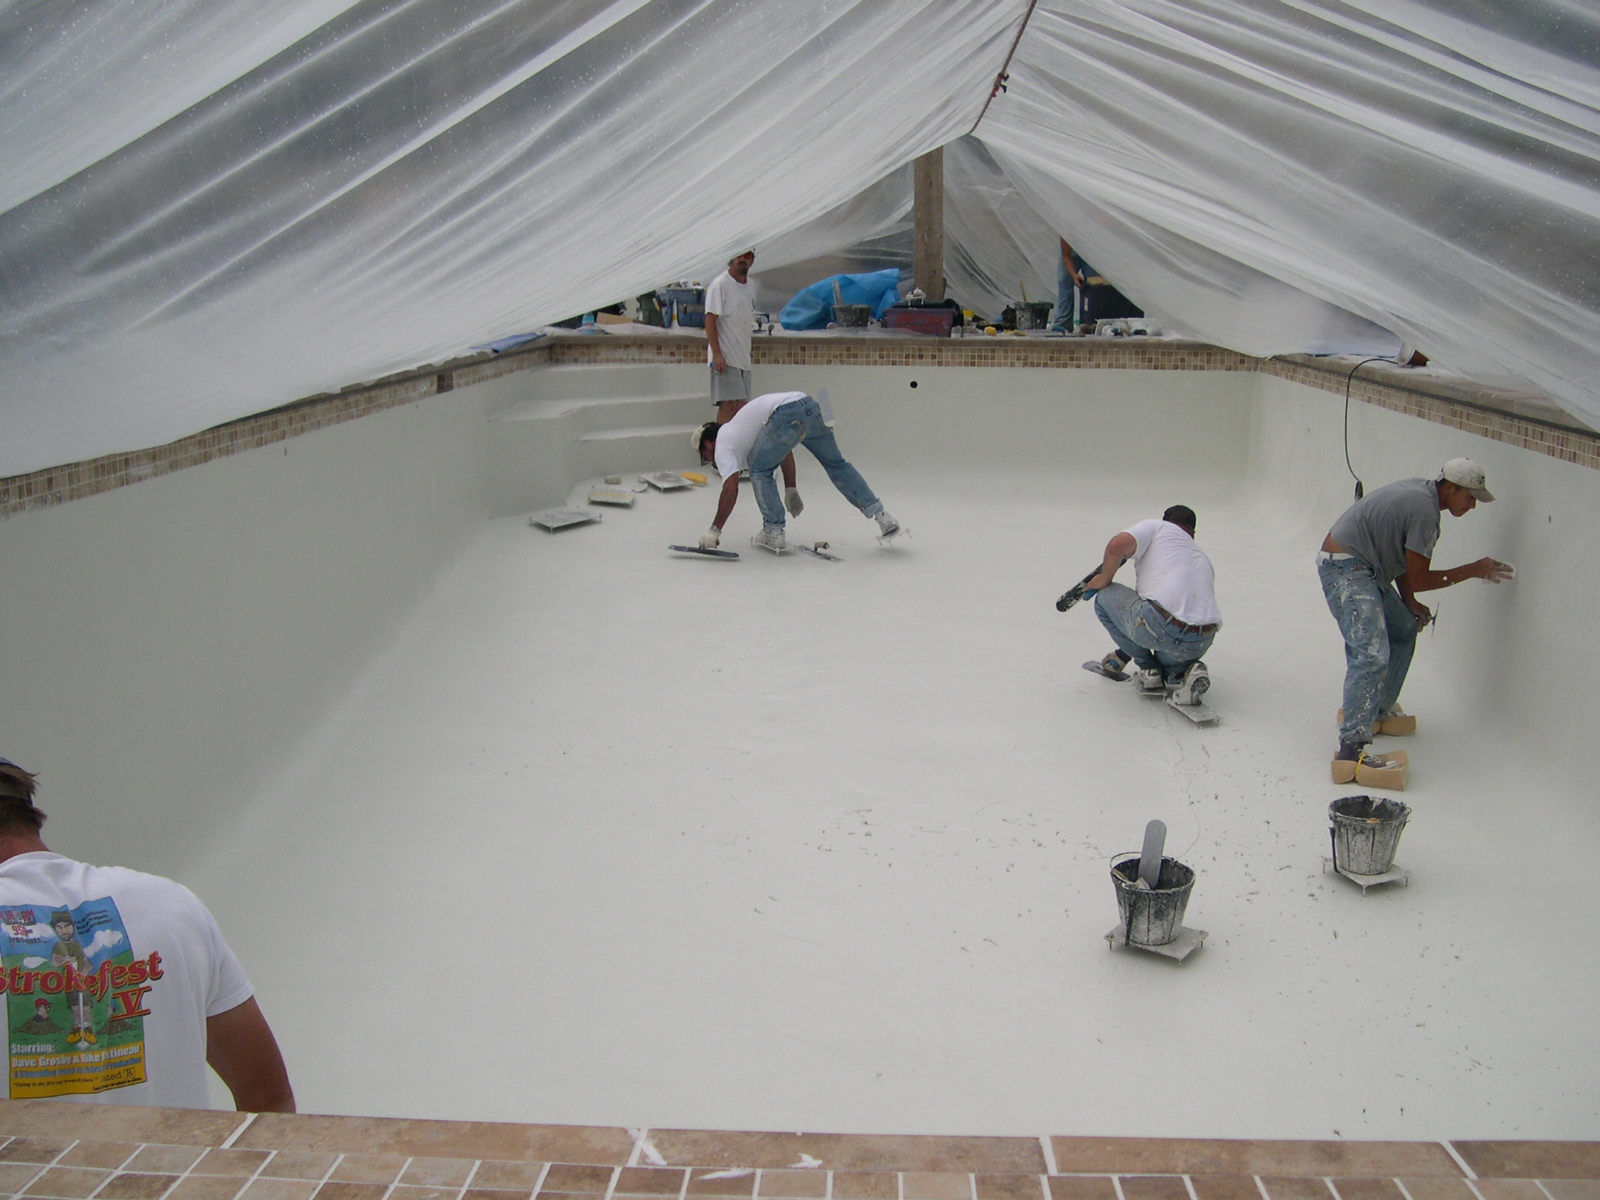 Plastering Under a Tent